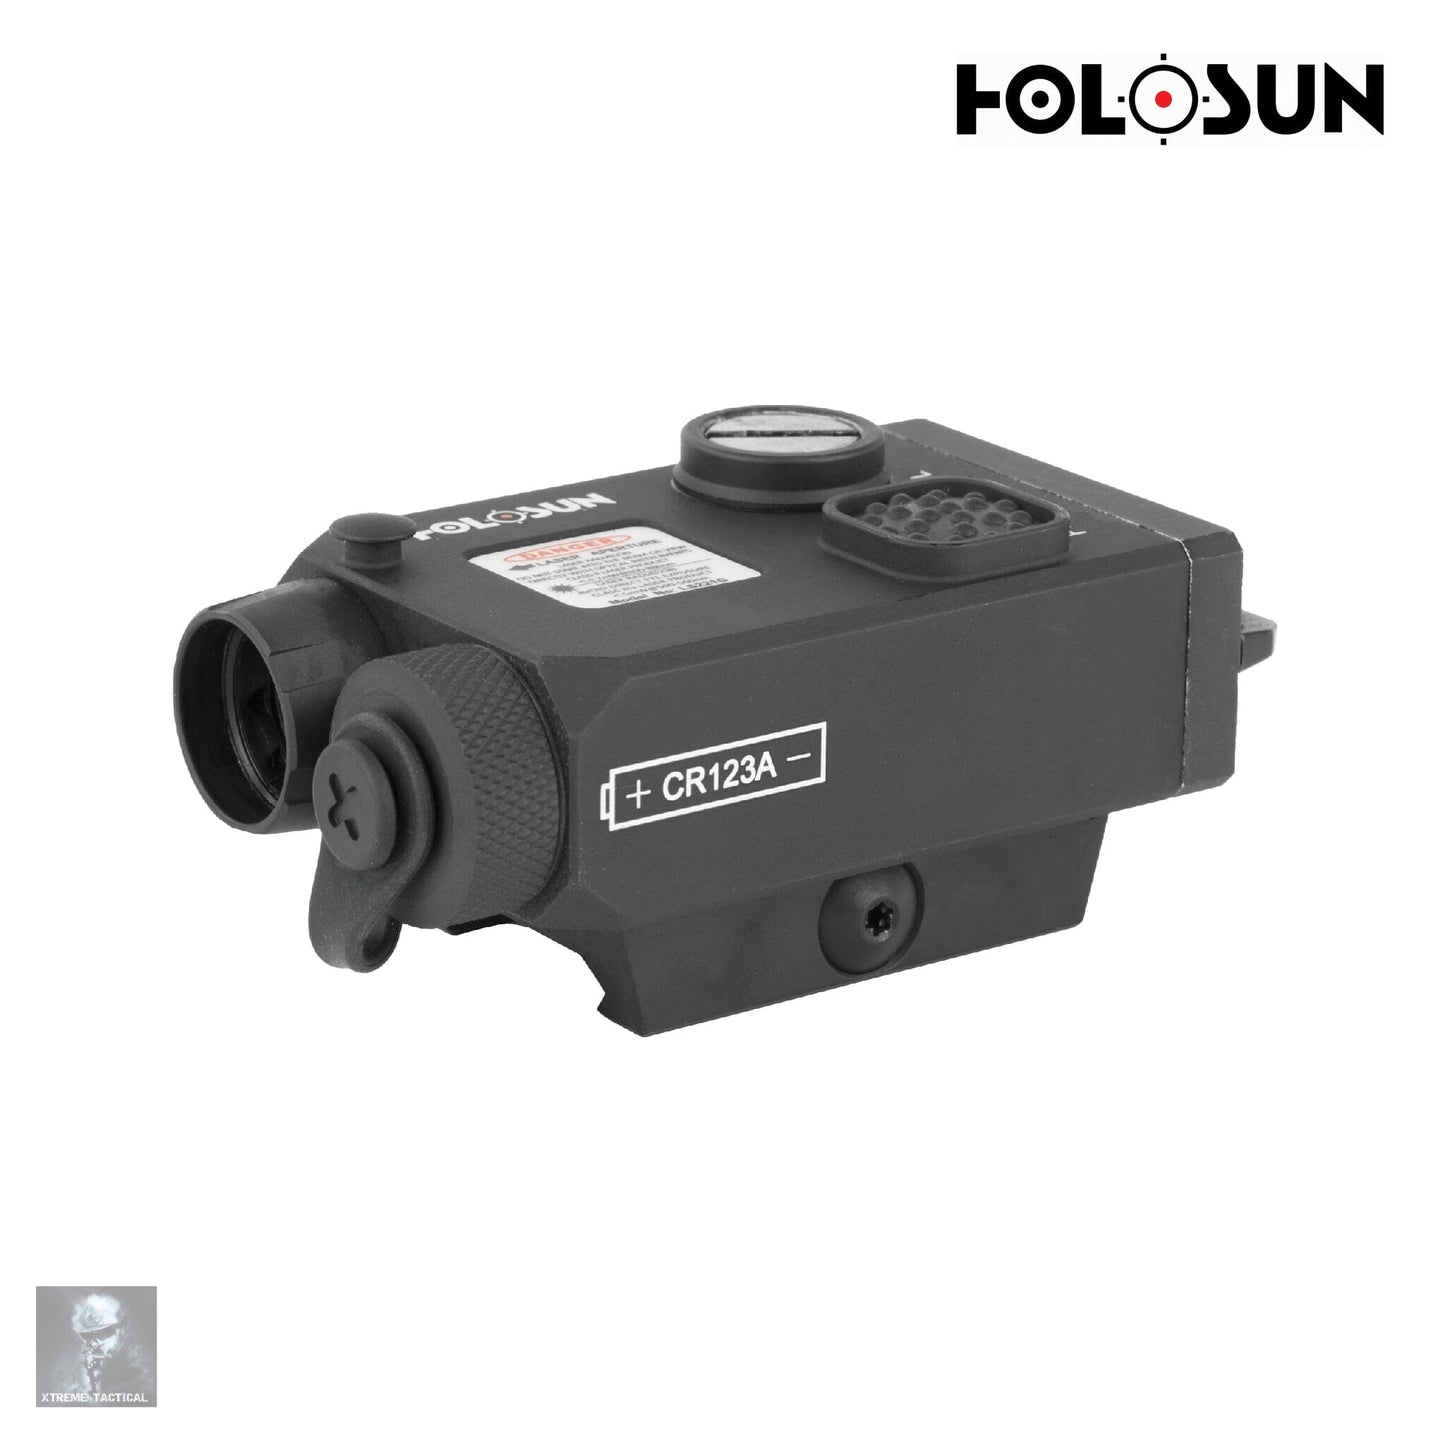 Holosun LS221R Red Laser and IR Laser Sight Weapon Laser Device Holosun Technologies 